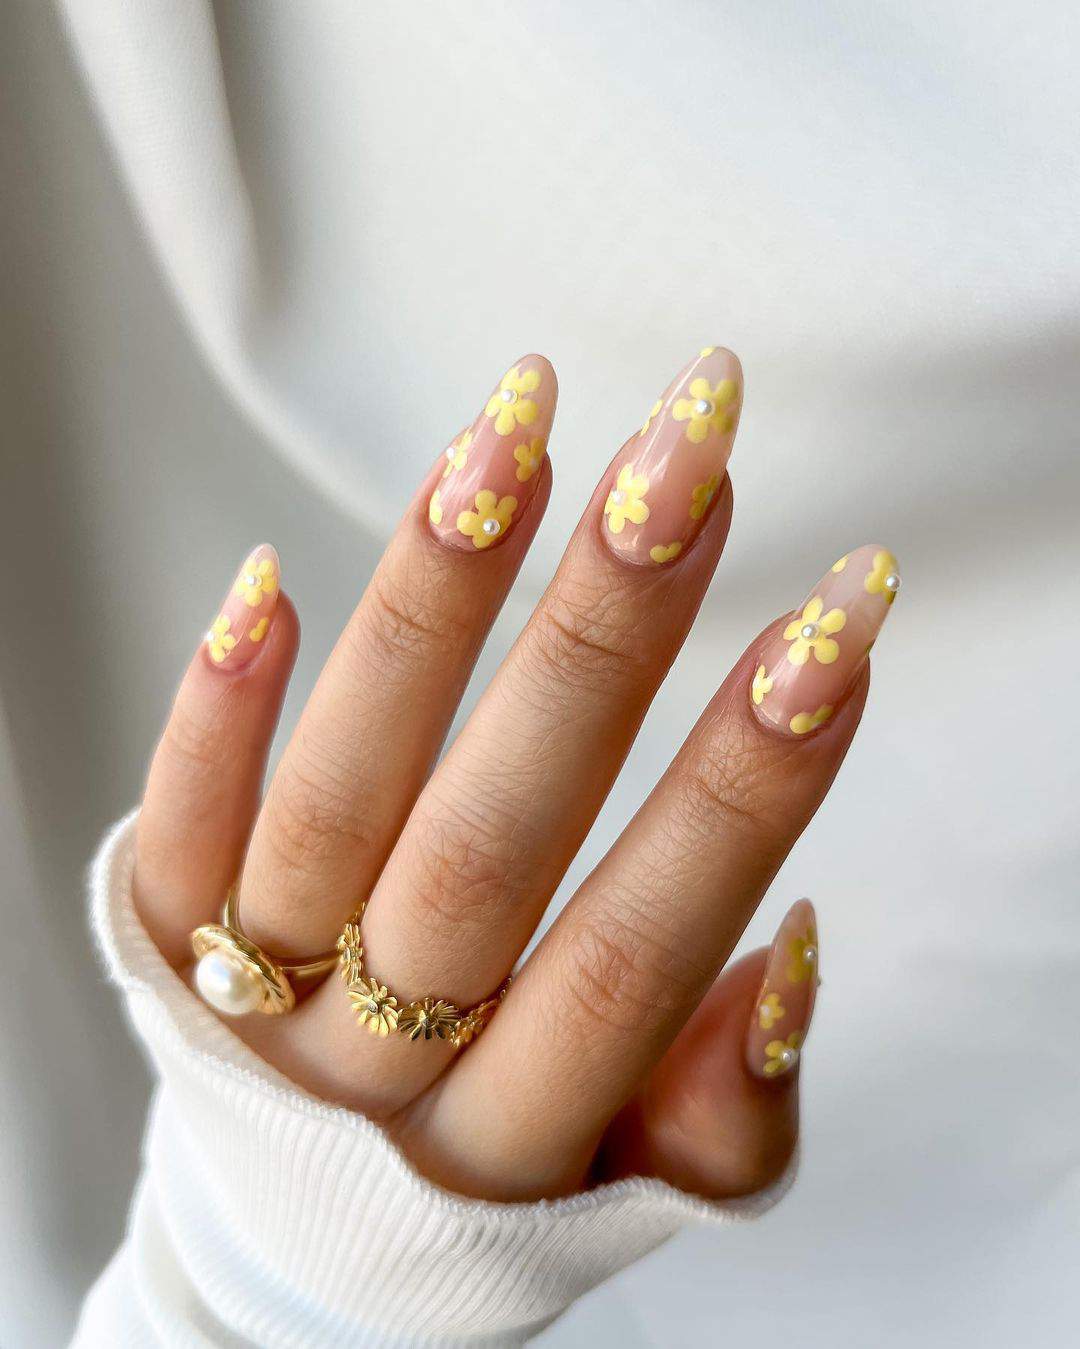 100+ Must Try Fall Nail Art Designs And Nail Ideas images 71